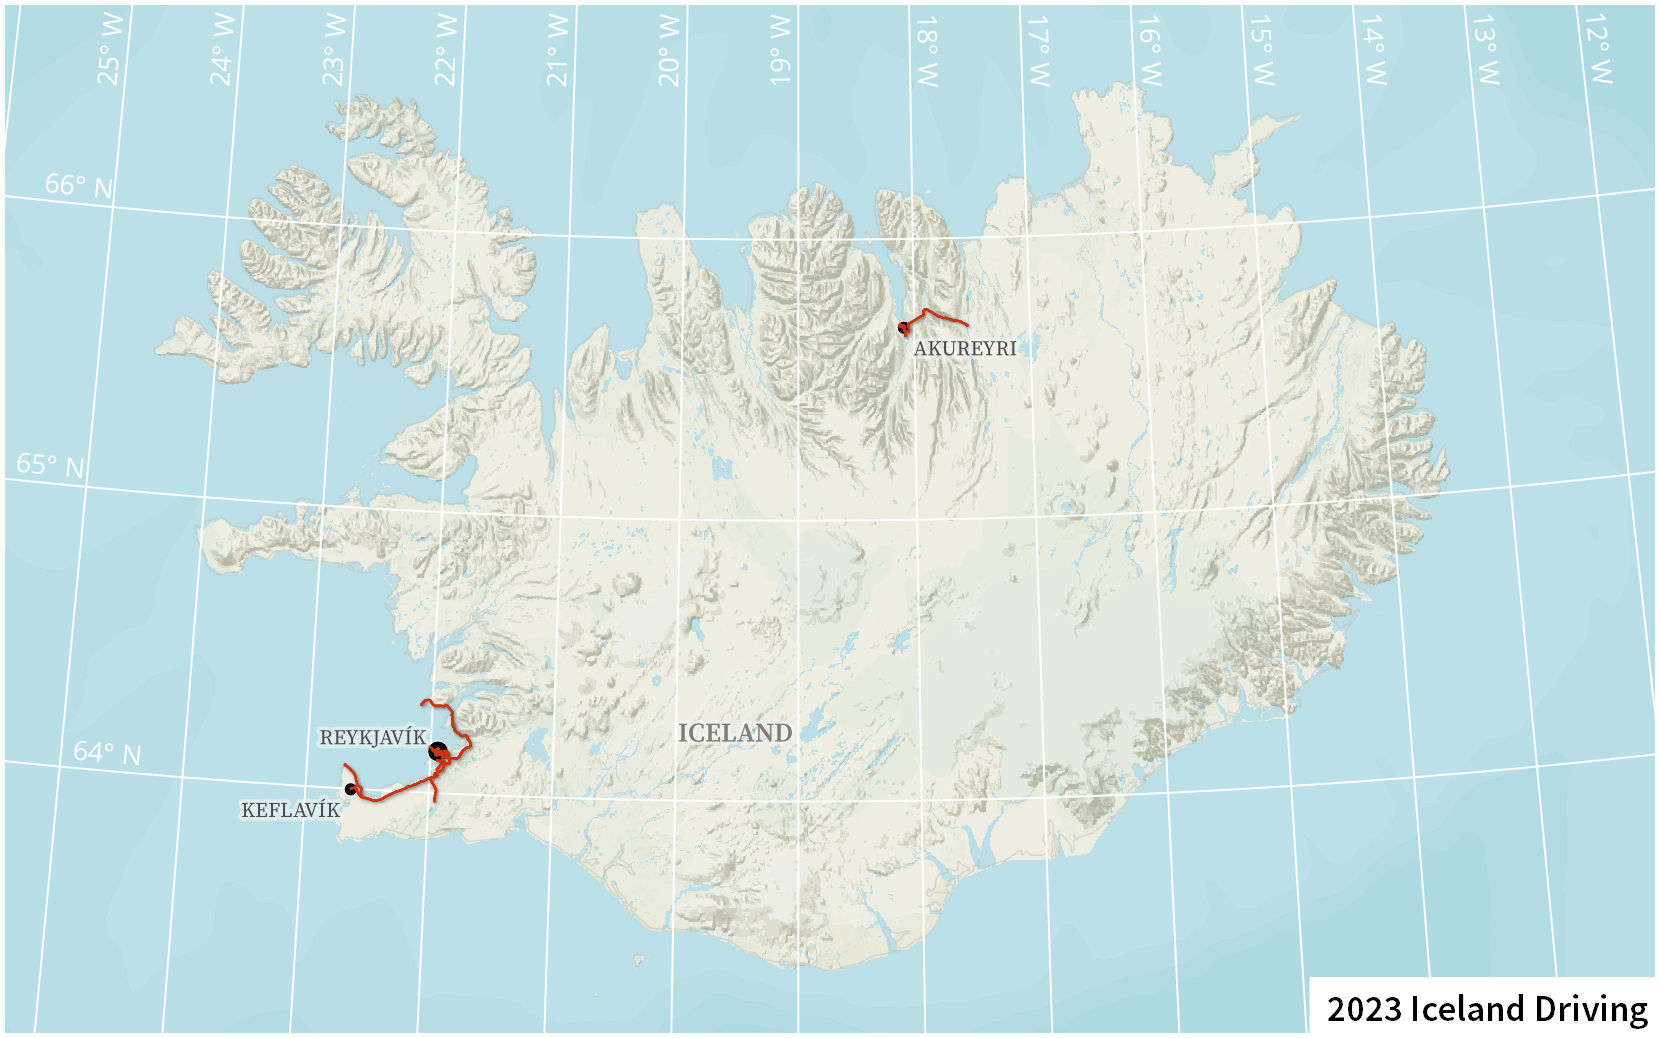 A map of Iceland, showing driving in the southwest near Reykjavík and Keflavík, and in the north near Akureyri.